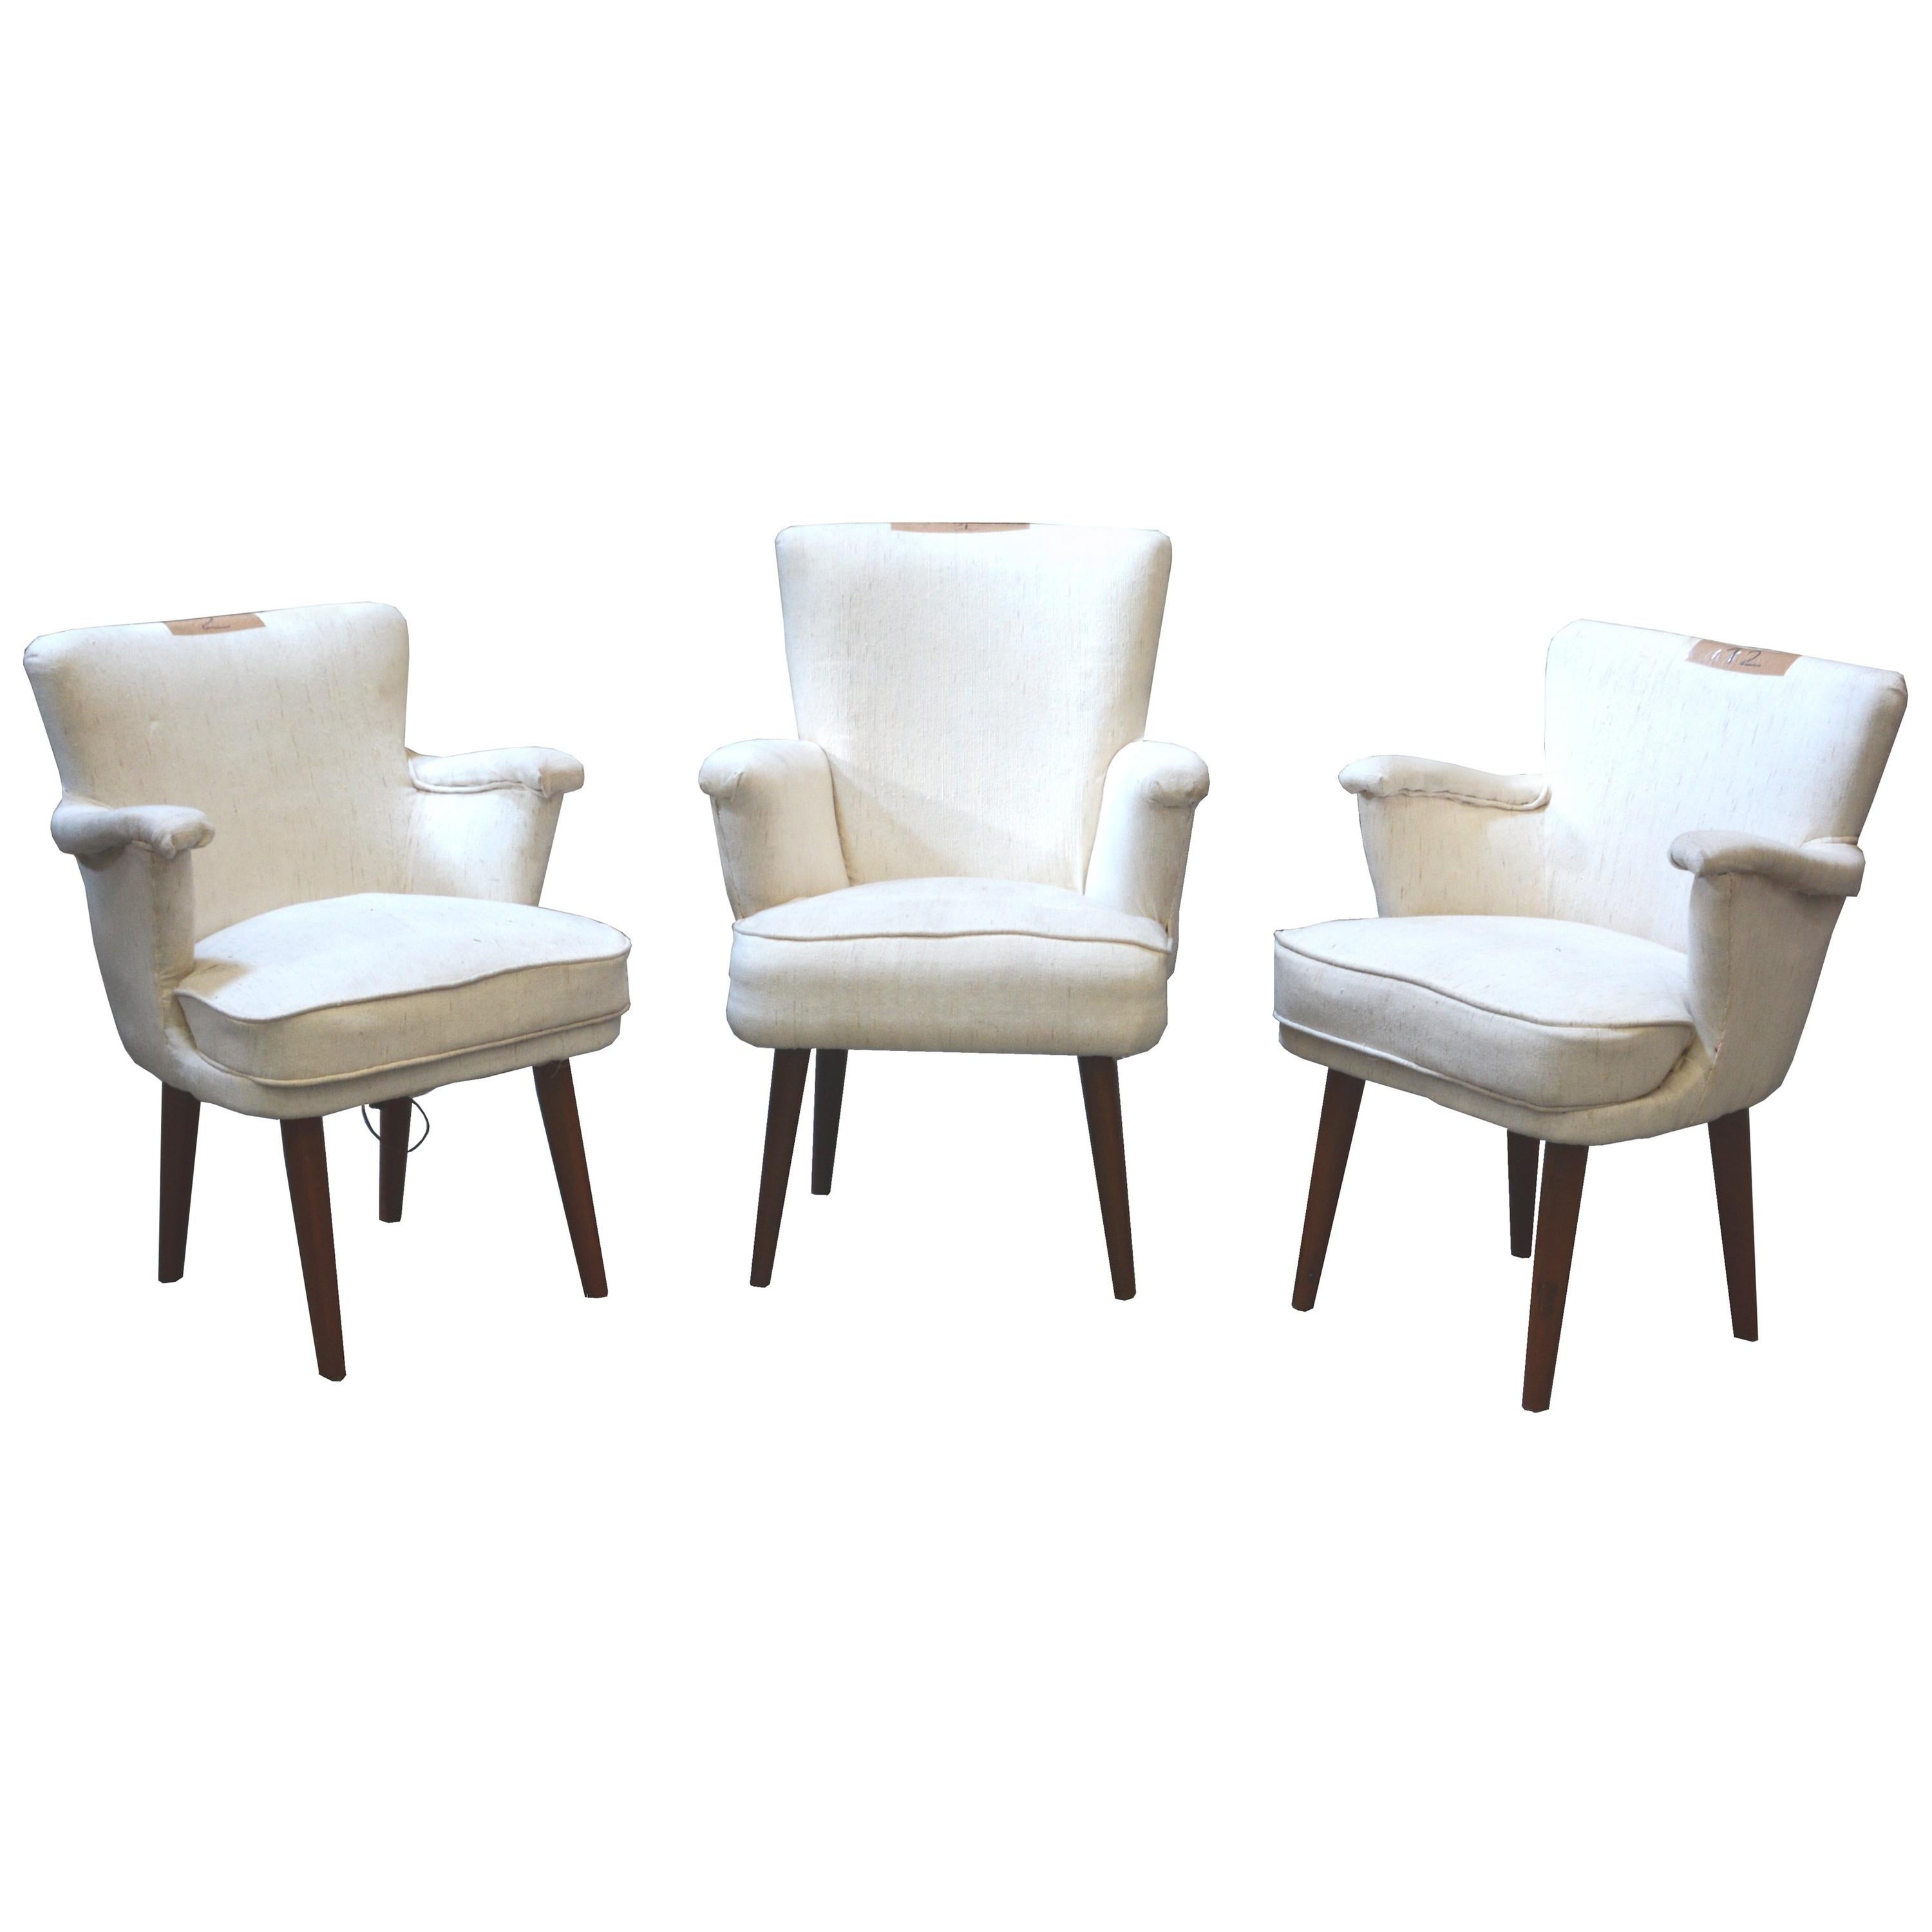 Gustavo Pulitzer Set of 3 Dining Armchairs from MV Augustus Ocean Liner, 1952 For Sale